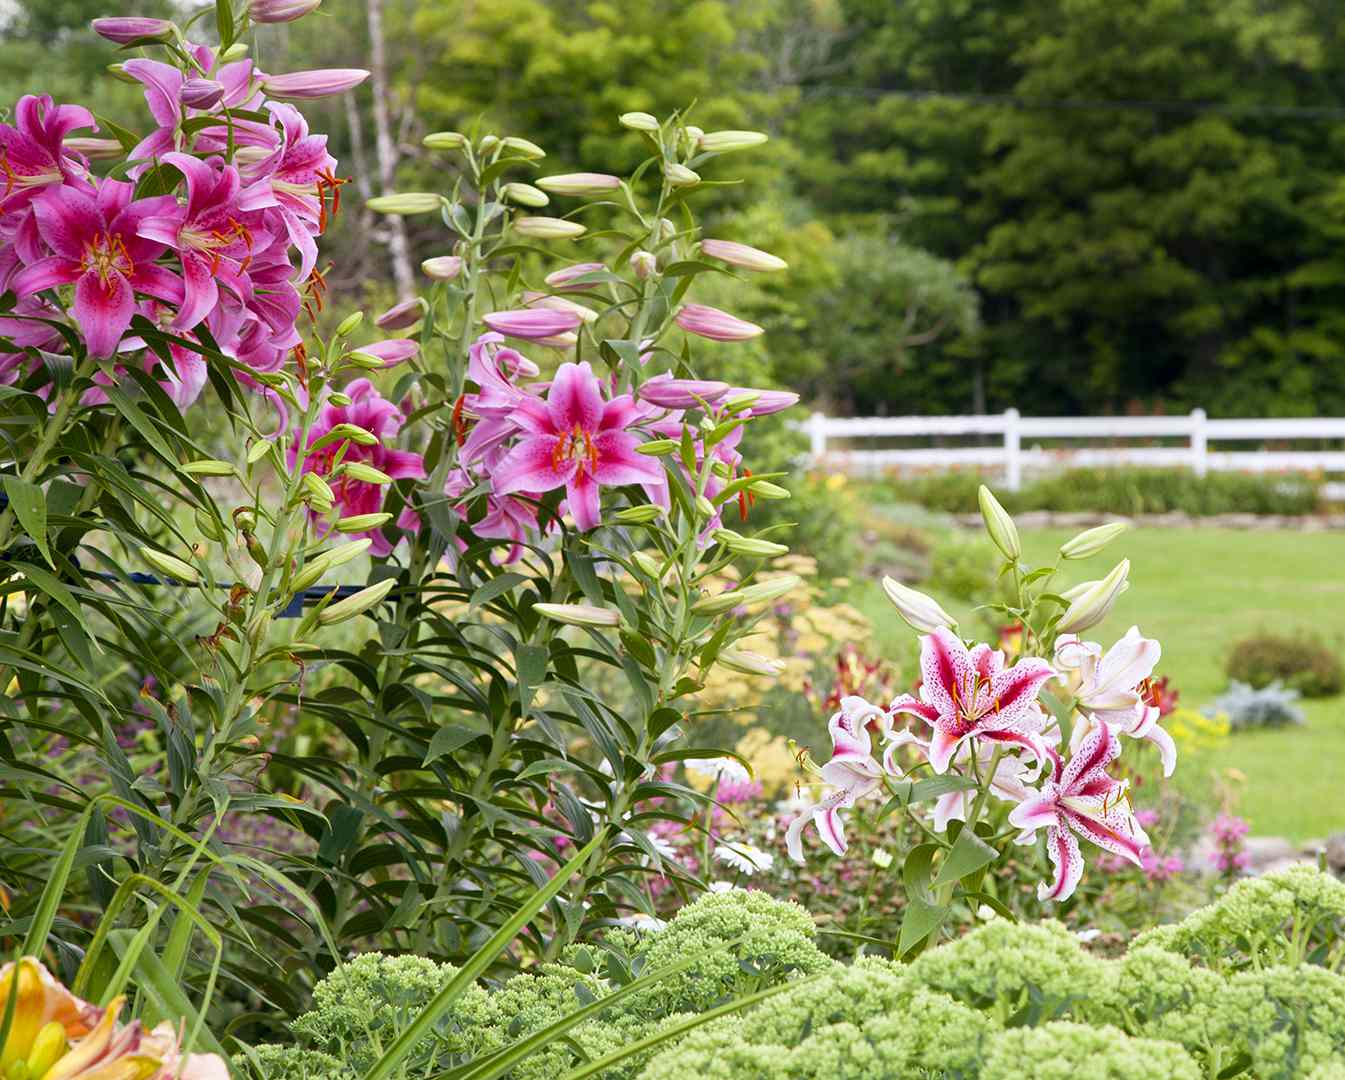 statuesque asiatic lilies in garden bed 4ddade75